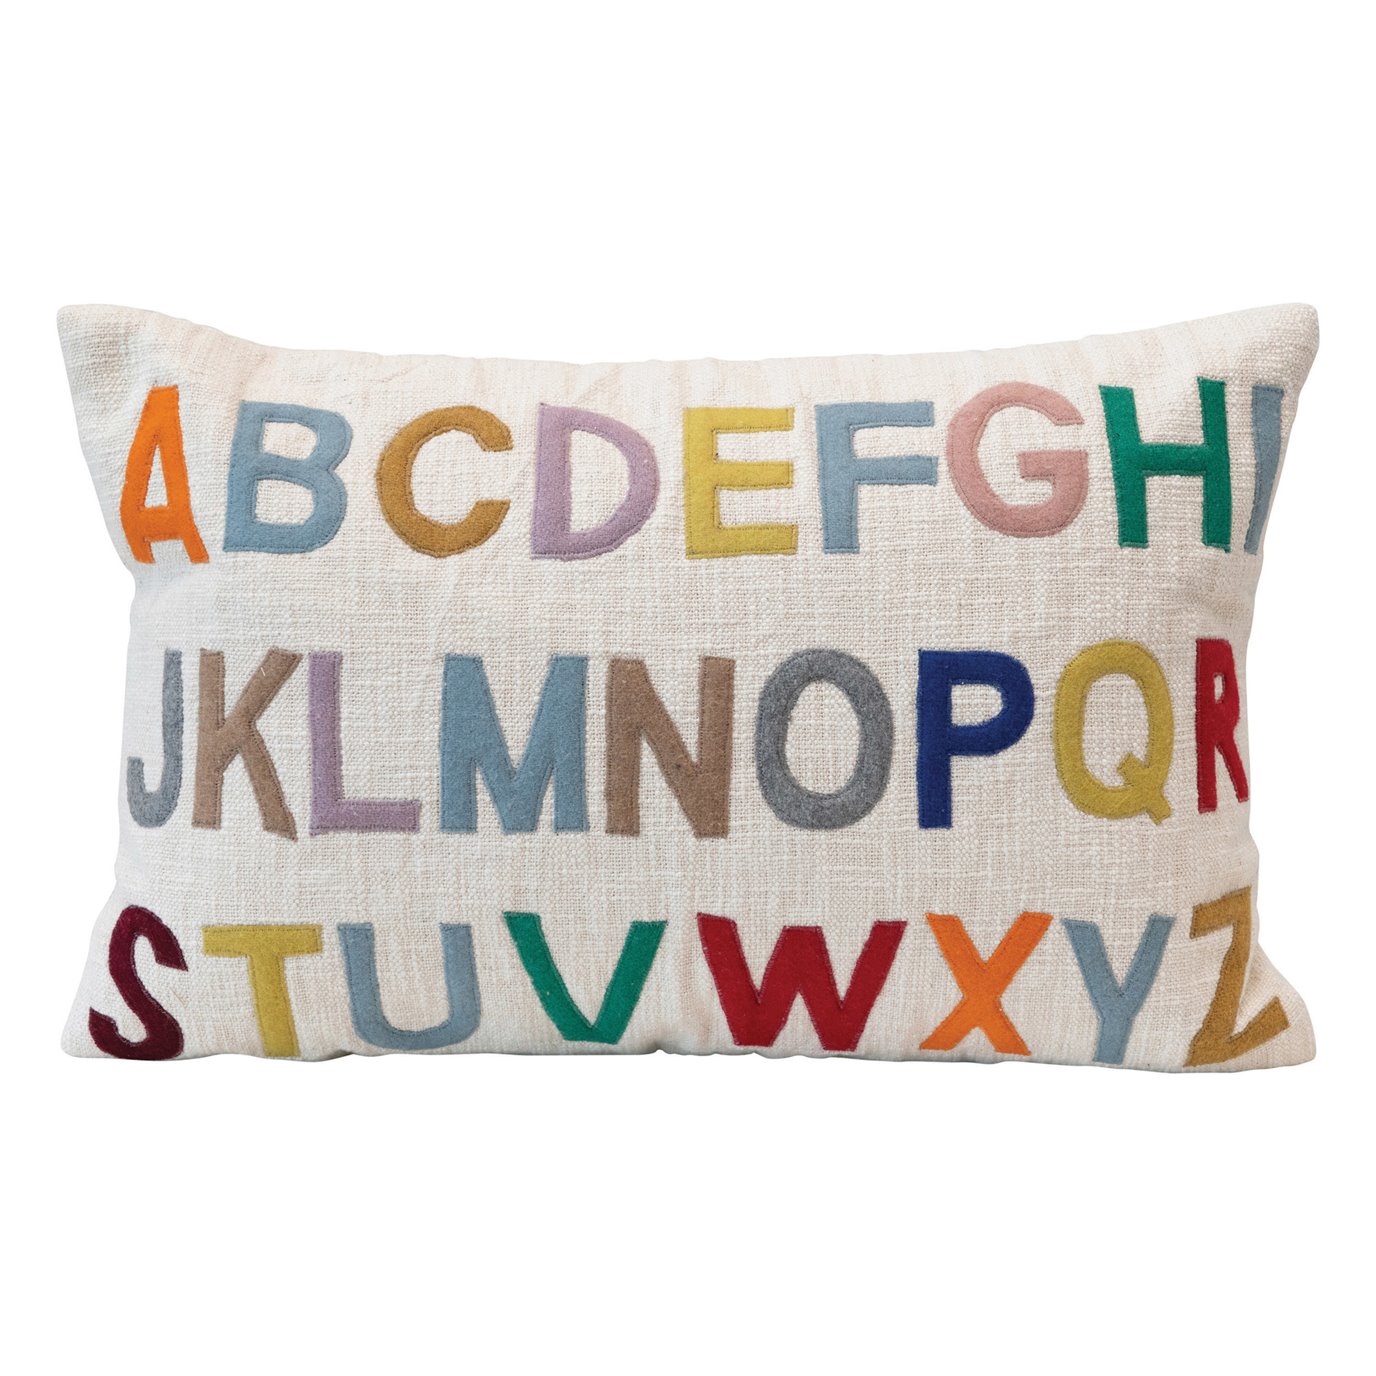 Cotton Lumbar Pillow with Embroidered Alphabet, Multi Color